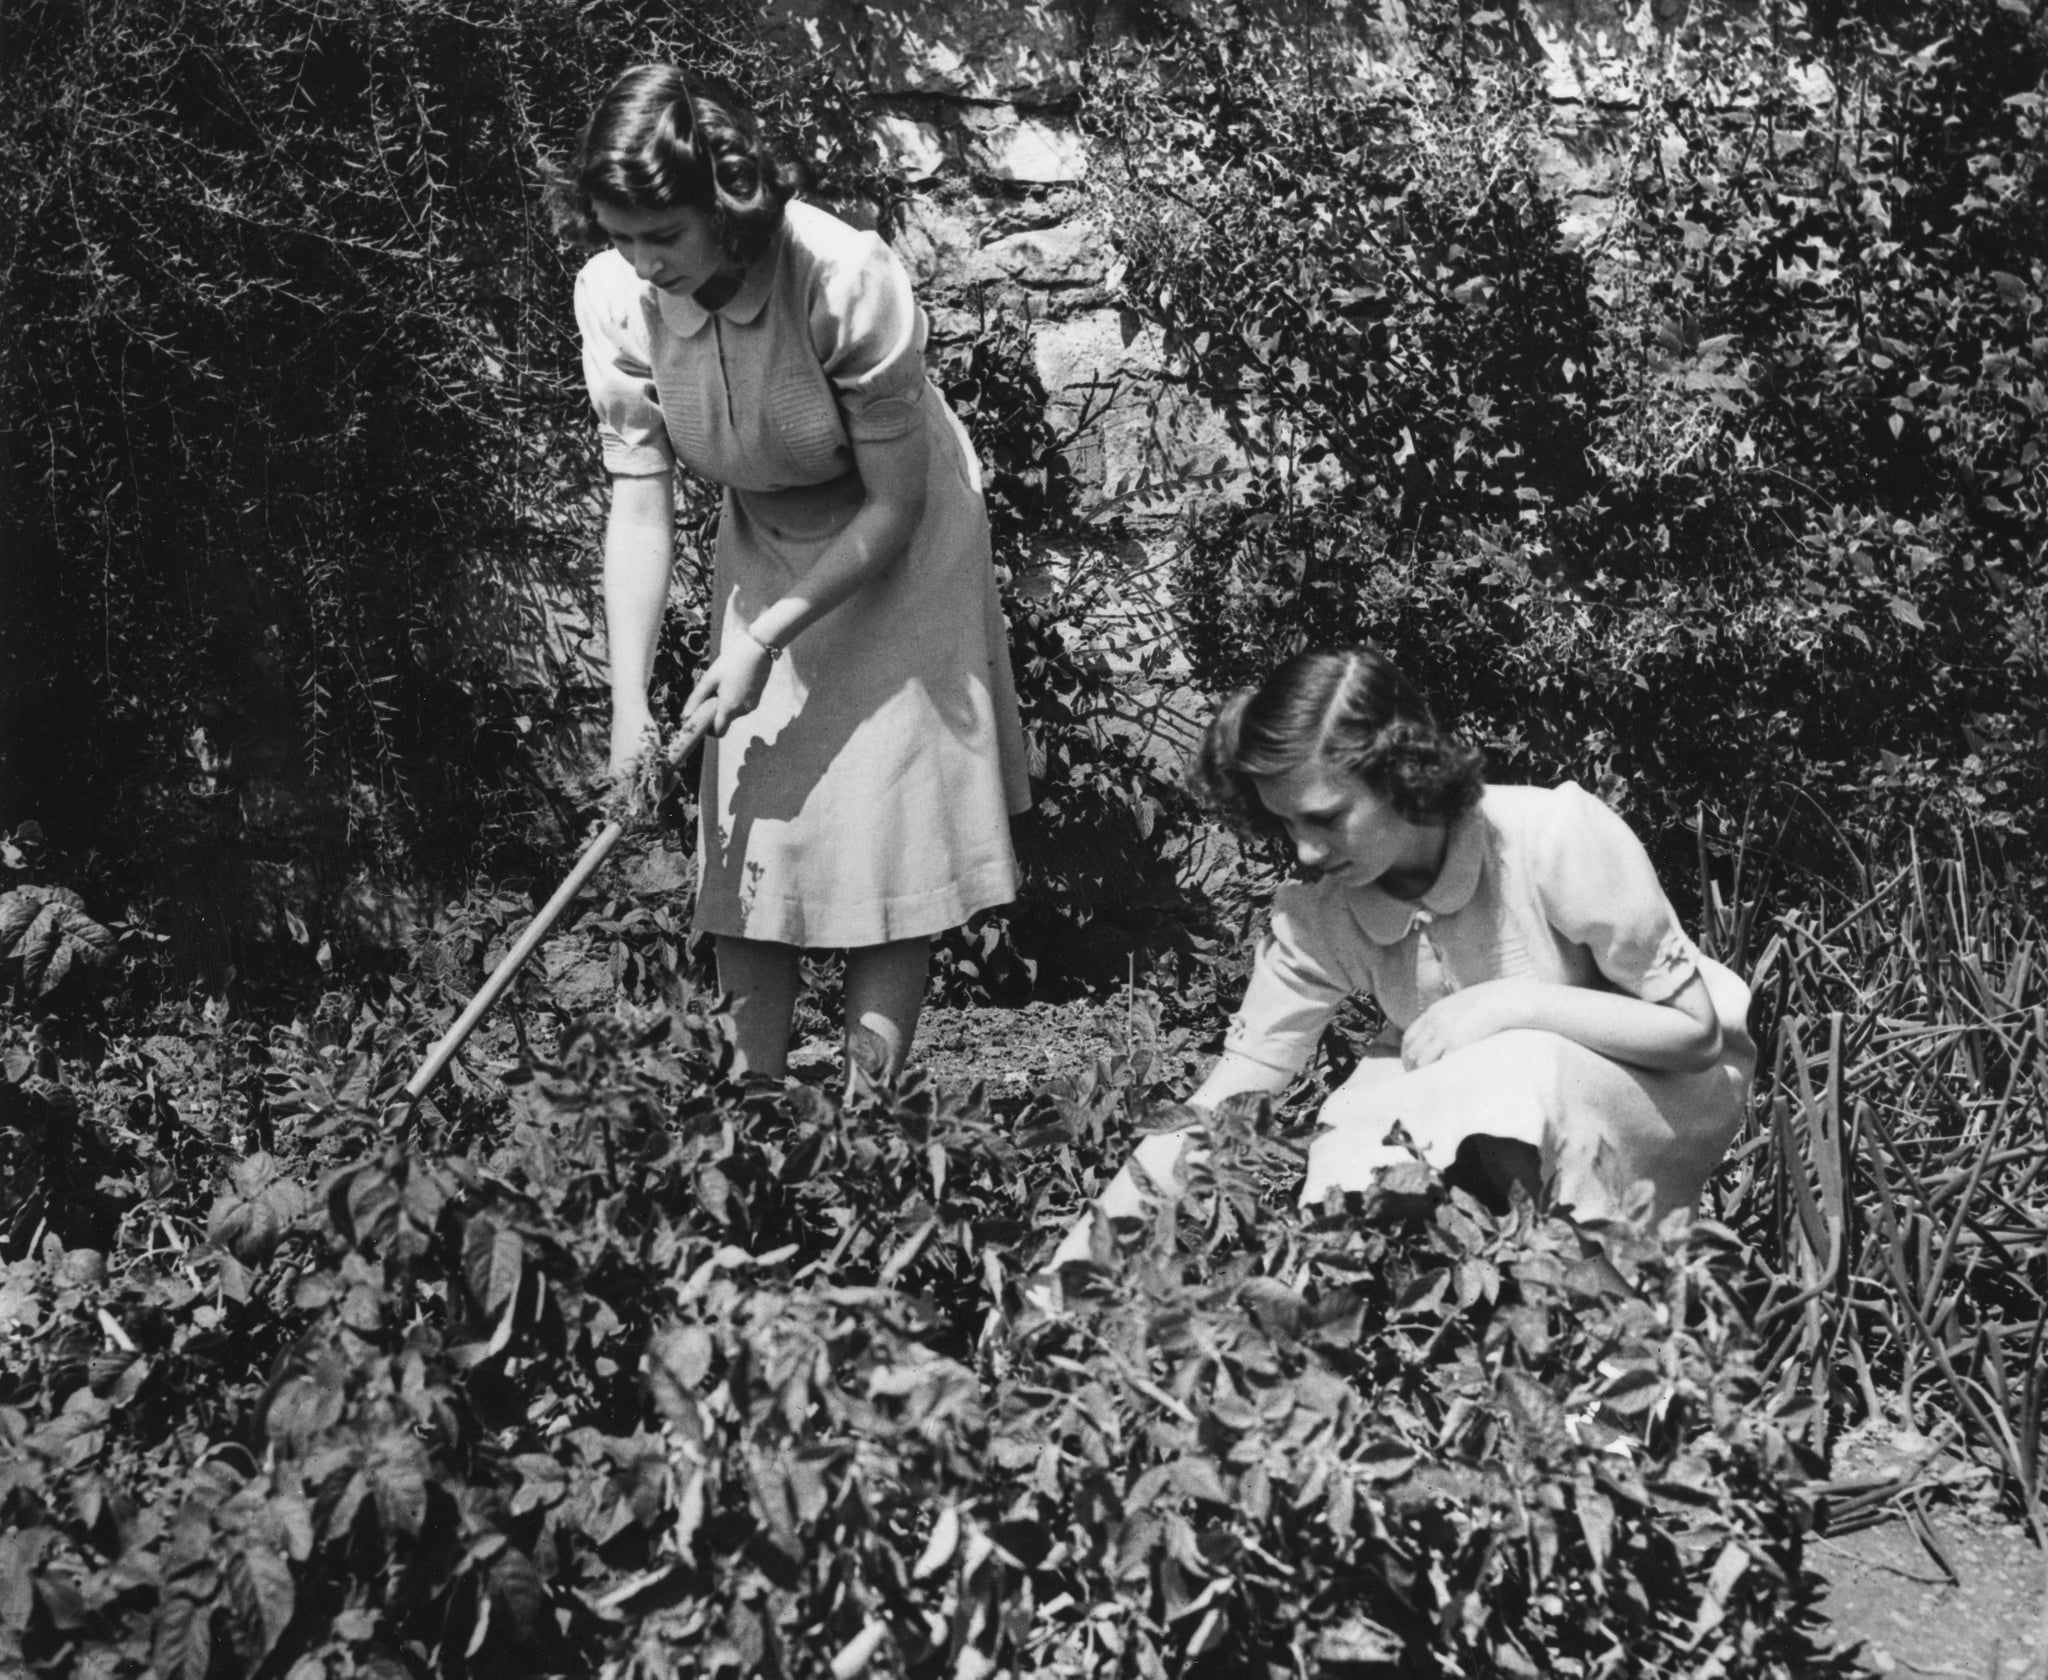 Elizabeth and Margaret worked on their garden as part of the ...